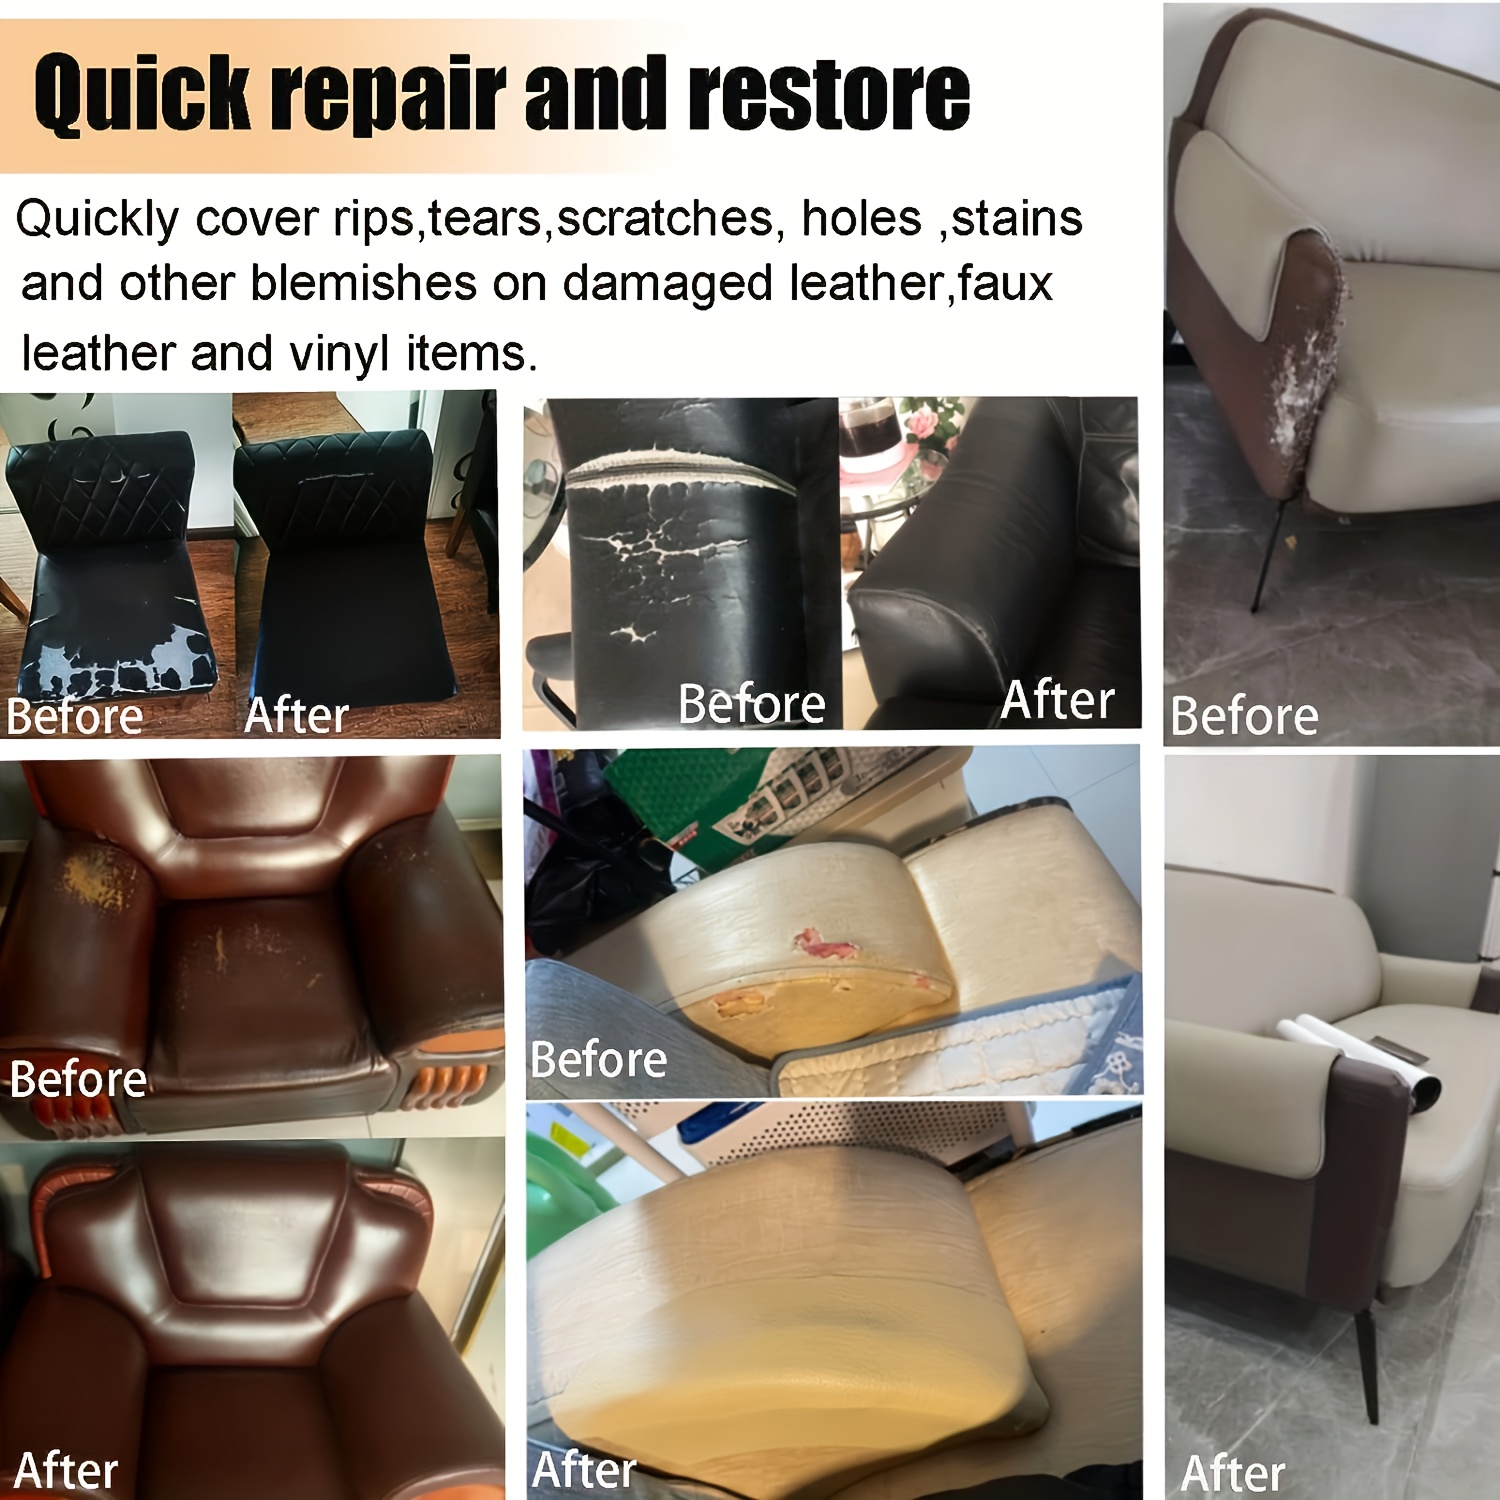 Leather Repair Kit for Furniture Cat Scratches, Faux Leather Repair Tape,  Car Leather Repair Kit, Leather Vinyl Repair Patch for Jackets,Bags,Chairs